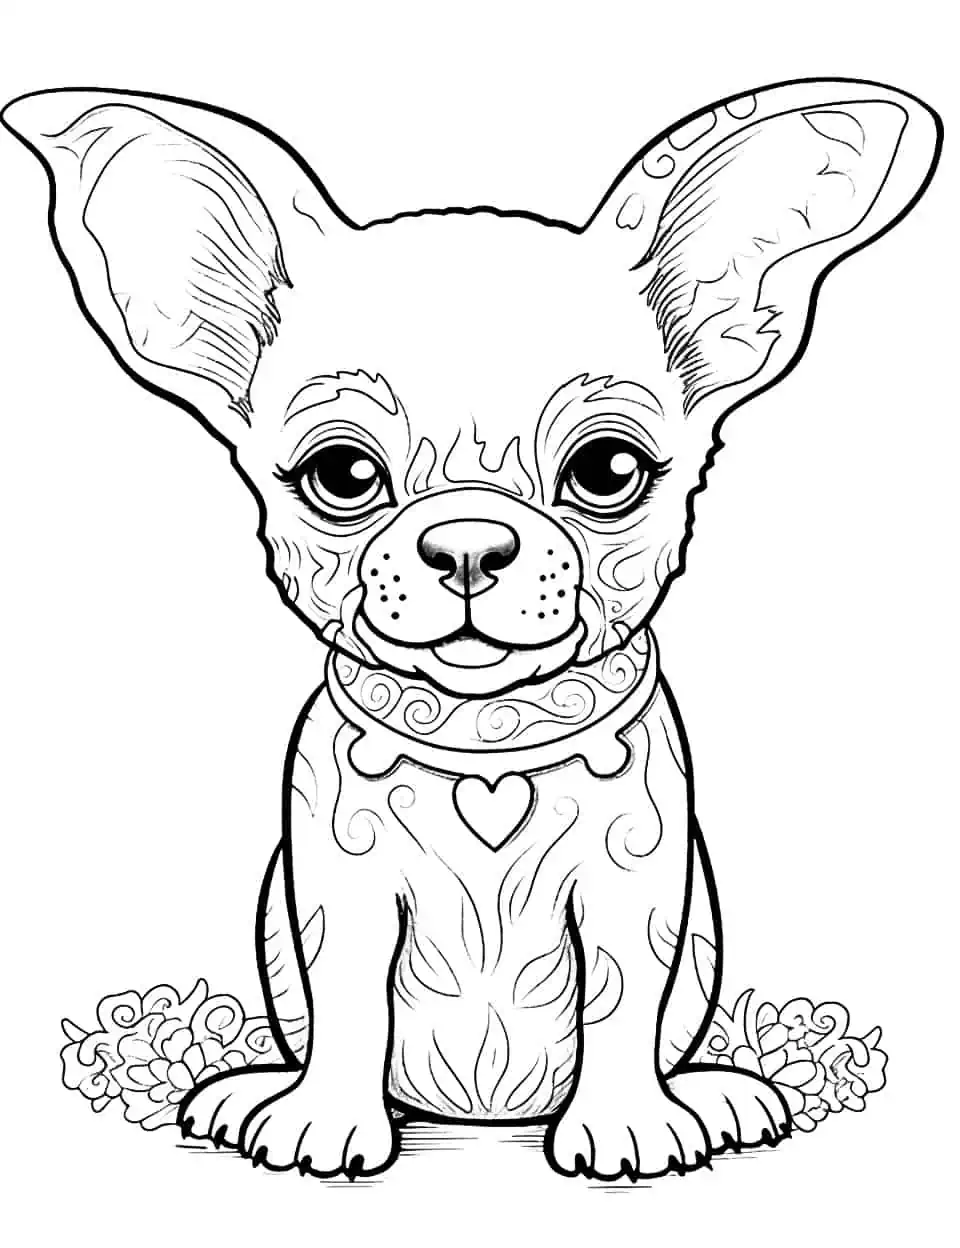 Mandala and Chihuahua Mix Dog Coloring Page - A cute Chihuahua in the center of a detailed, intricate mandala pattern.